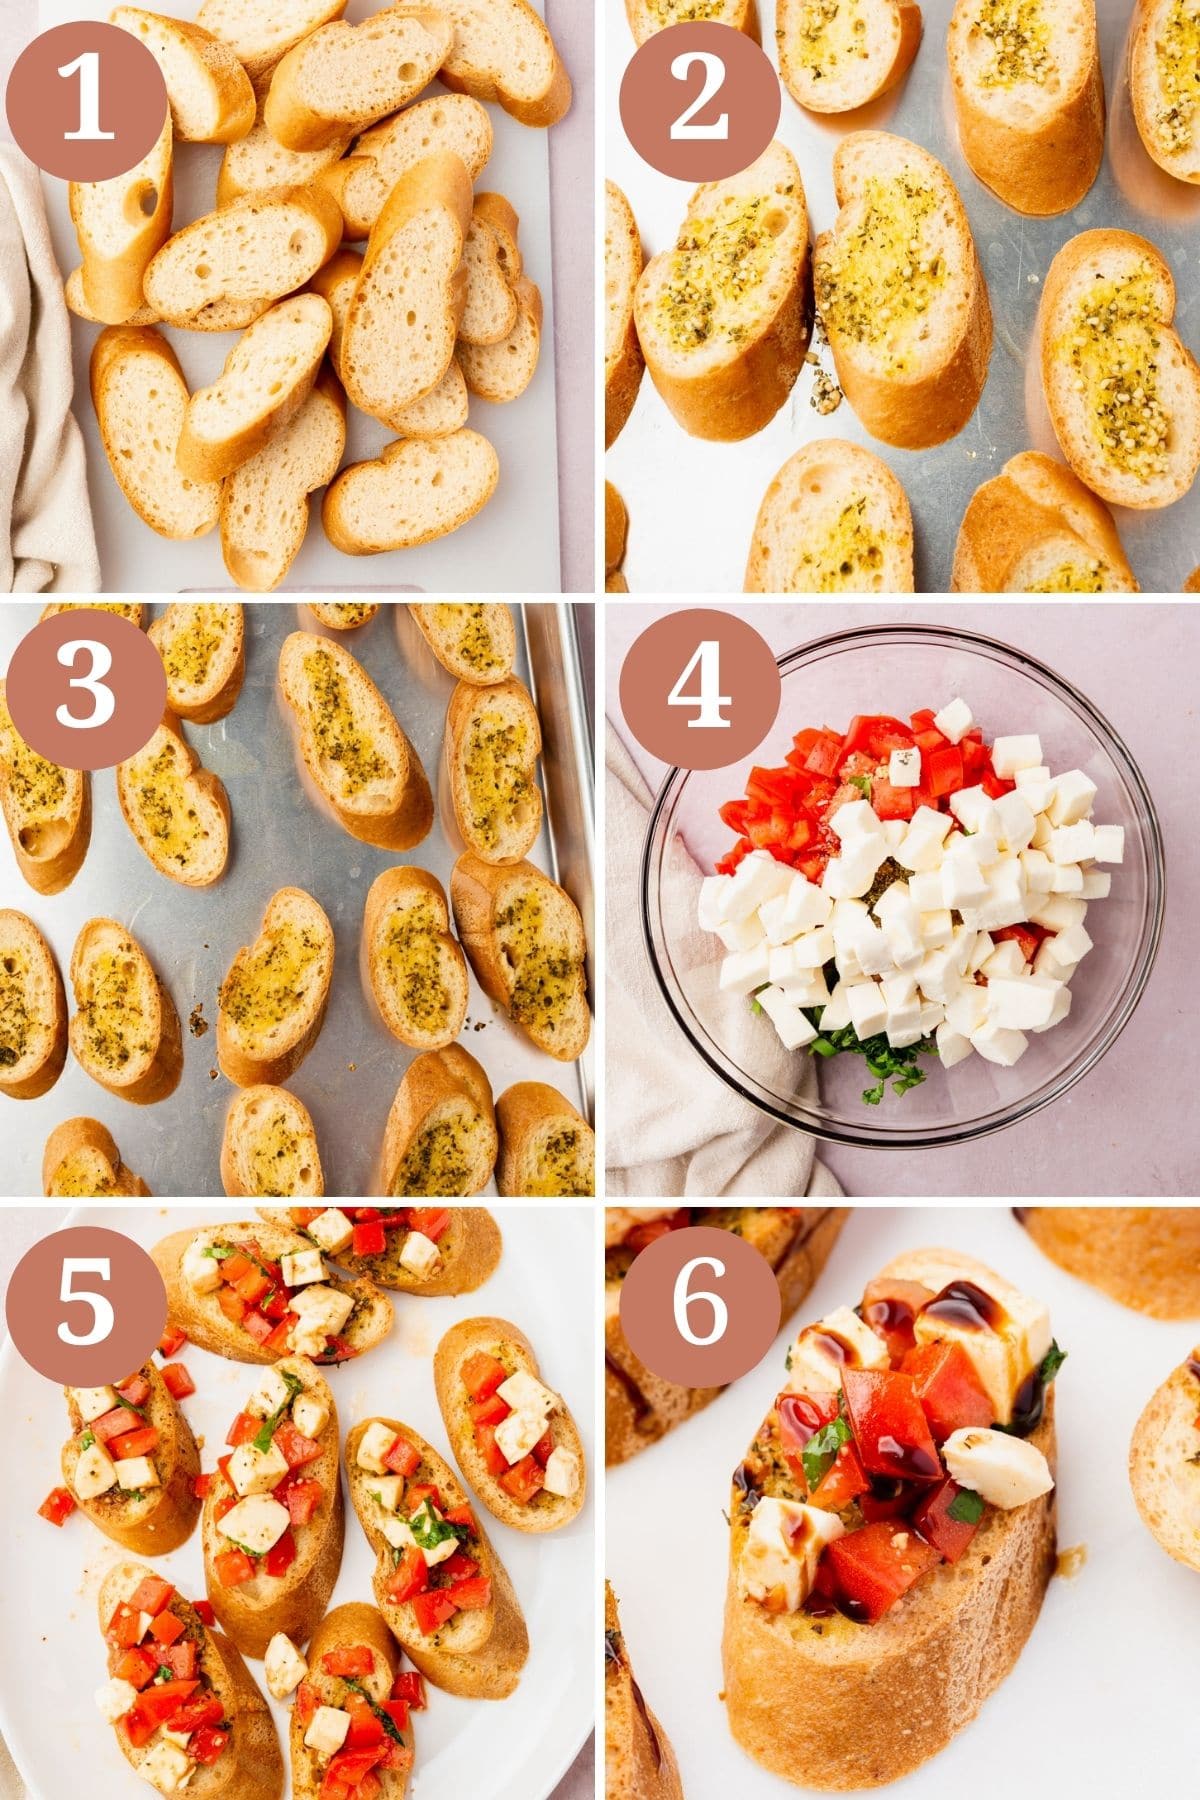 Steps showing how to make gluten-free bruschetta with mozzarella, from toasting the baguette slices, mixing together the tomatoes and mozzarella, topping the slices of toast with the tomato mixture, and drizzling with balsamic glaze.